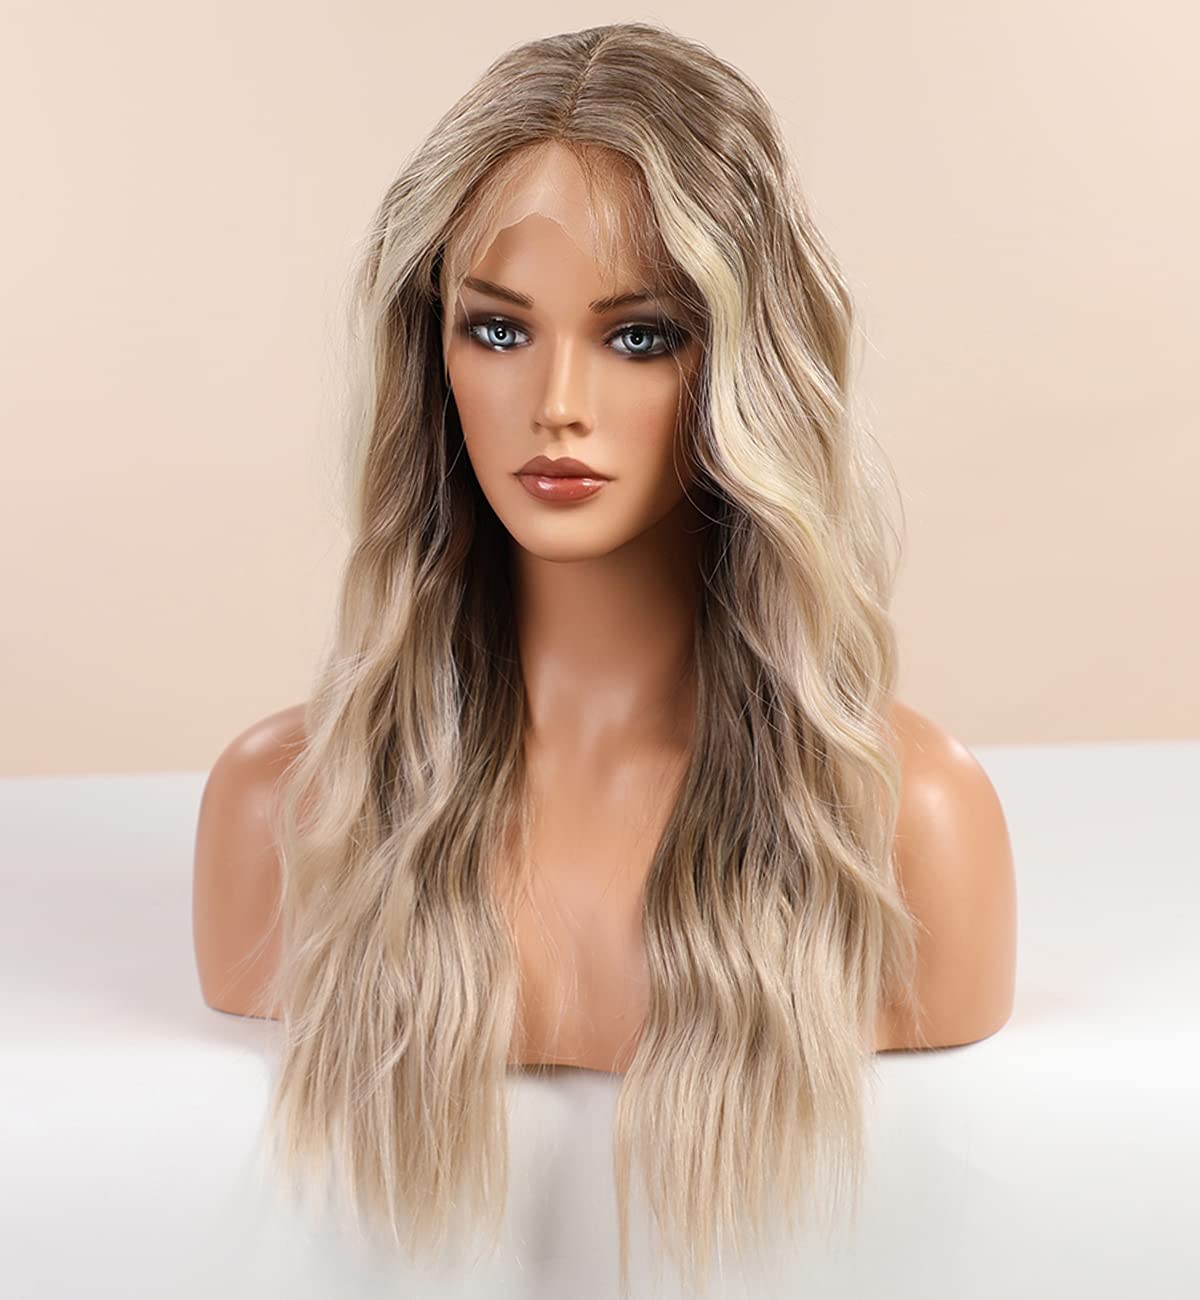 wavy wigs for black women,wigs with highlights,synthetic wigs for women,ombre wigs for women,deep wave frontal wig,wigs for women,highlighted wig,brown wig with highlights,synthetic lace wig,brown wig for women,ombre blonde wig lace synthetic wig,ombre lace wig,brown wigs with highlights,long wavy wig,wavy lace wig,ombre wig,613 wig,blonde wig,lace wighighlight lace wig,highlights wig